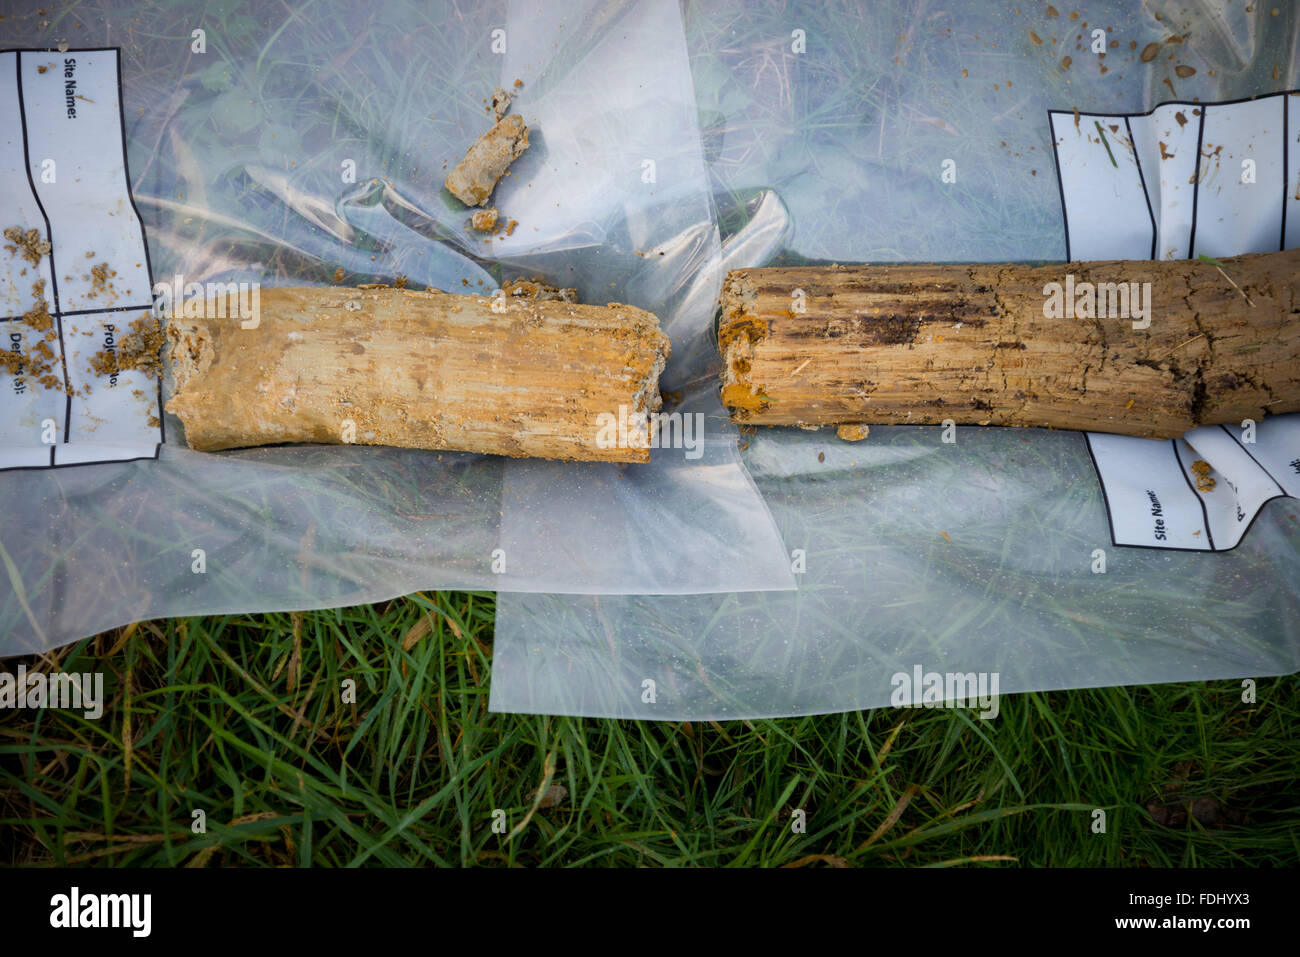 Soil core taken from the ground. Used to determine the soil and rock quality for building purposes. Soil report or survey. Stock Photo